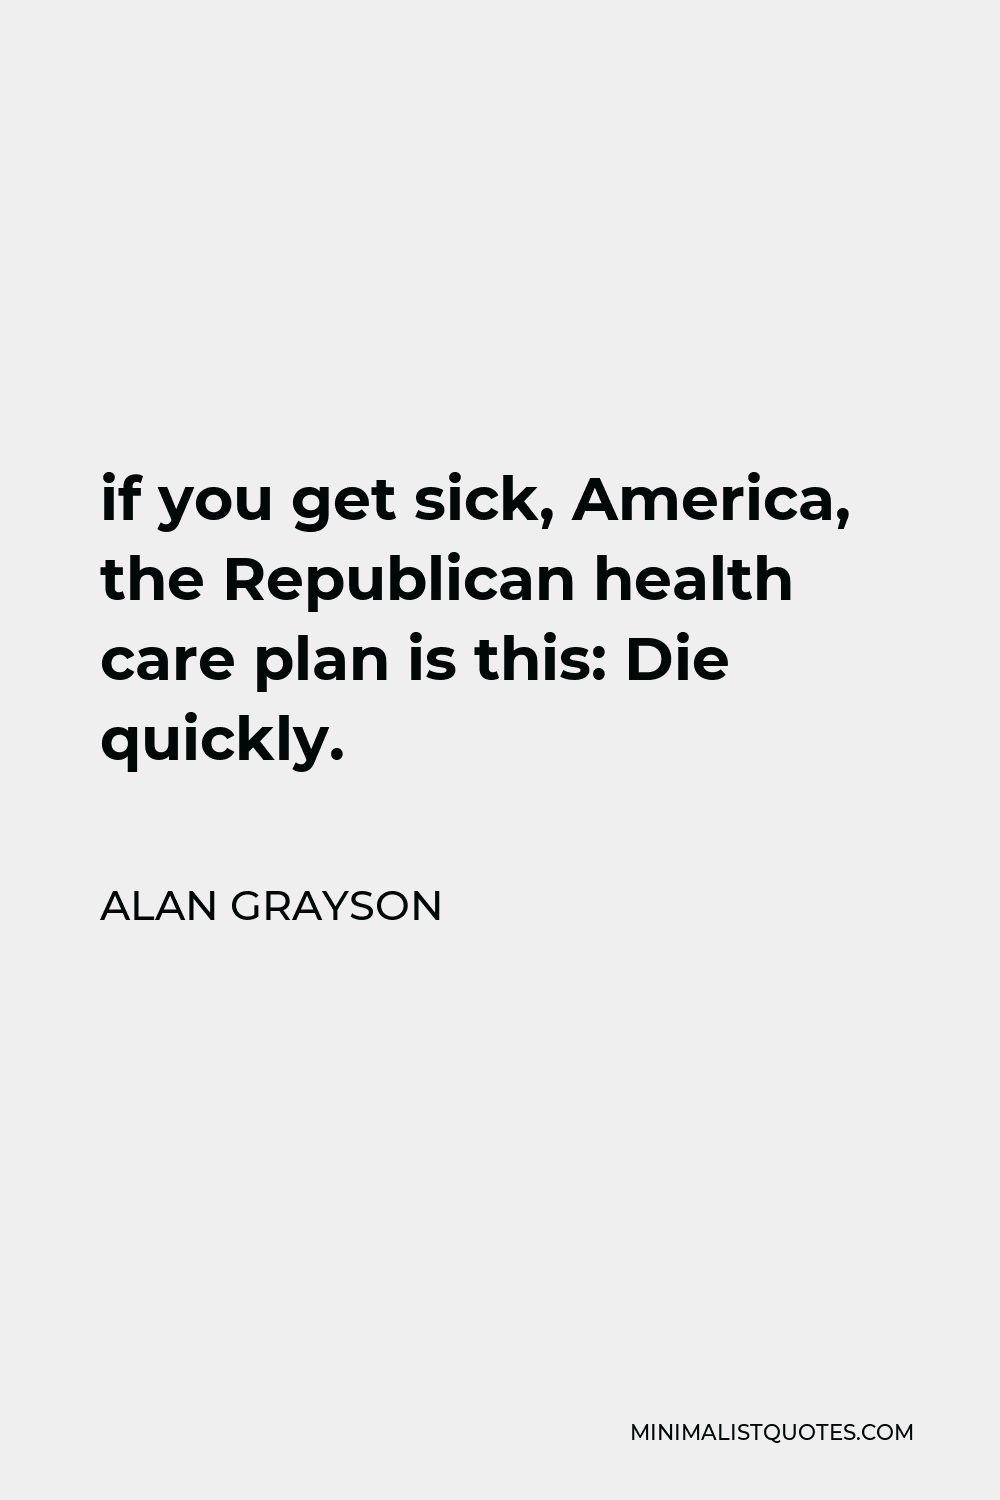 Alan Grayson Quote - if you get sick, America, the Republican health care plan is this: Die quickly.